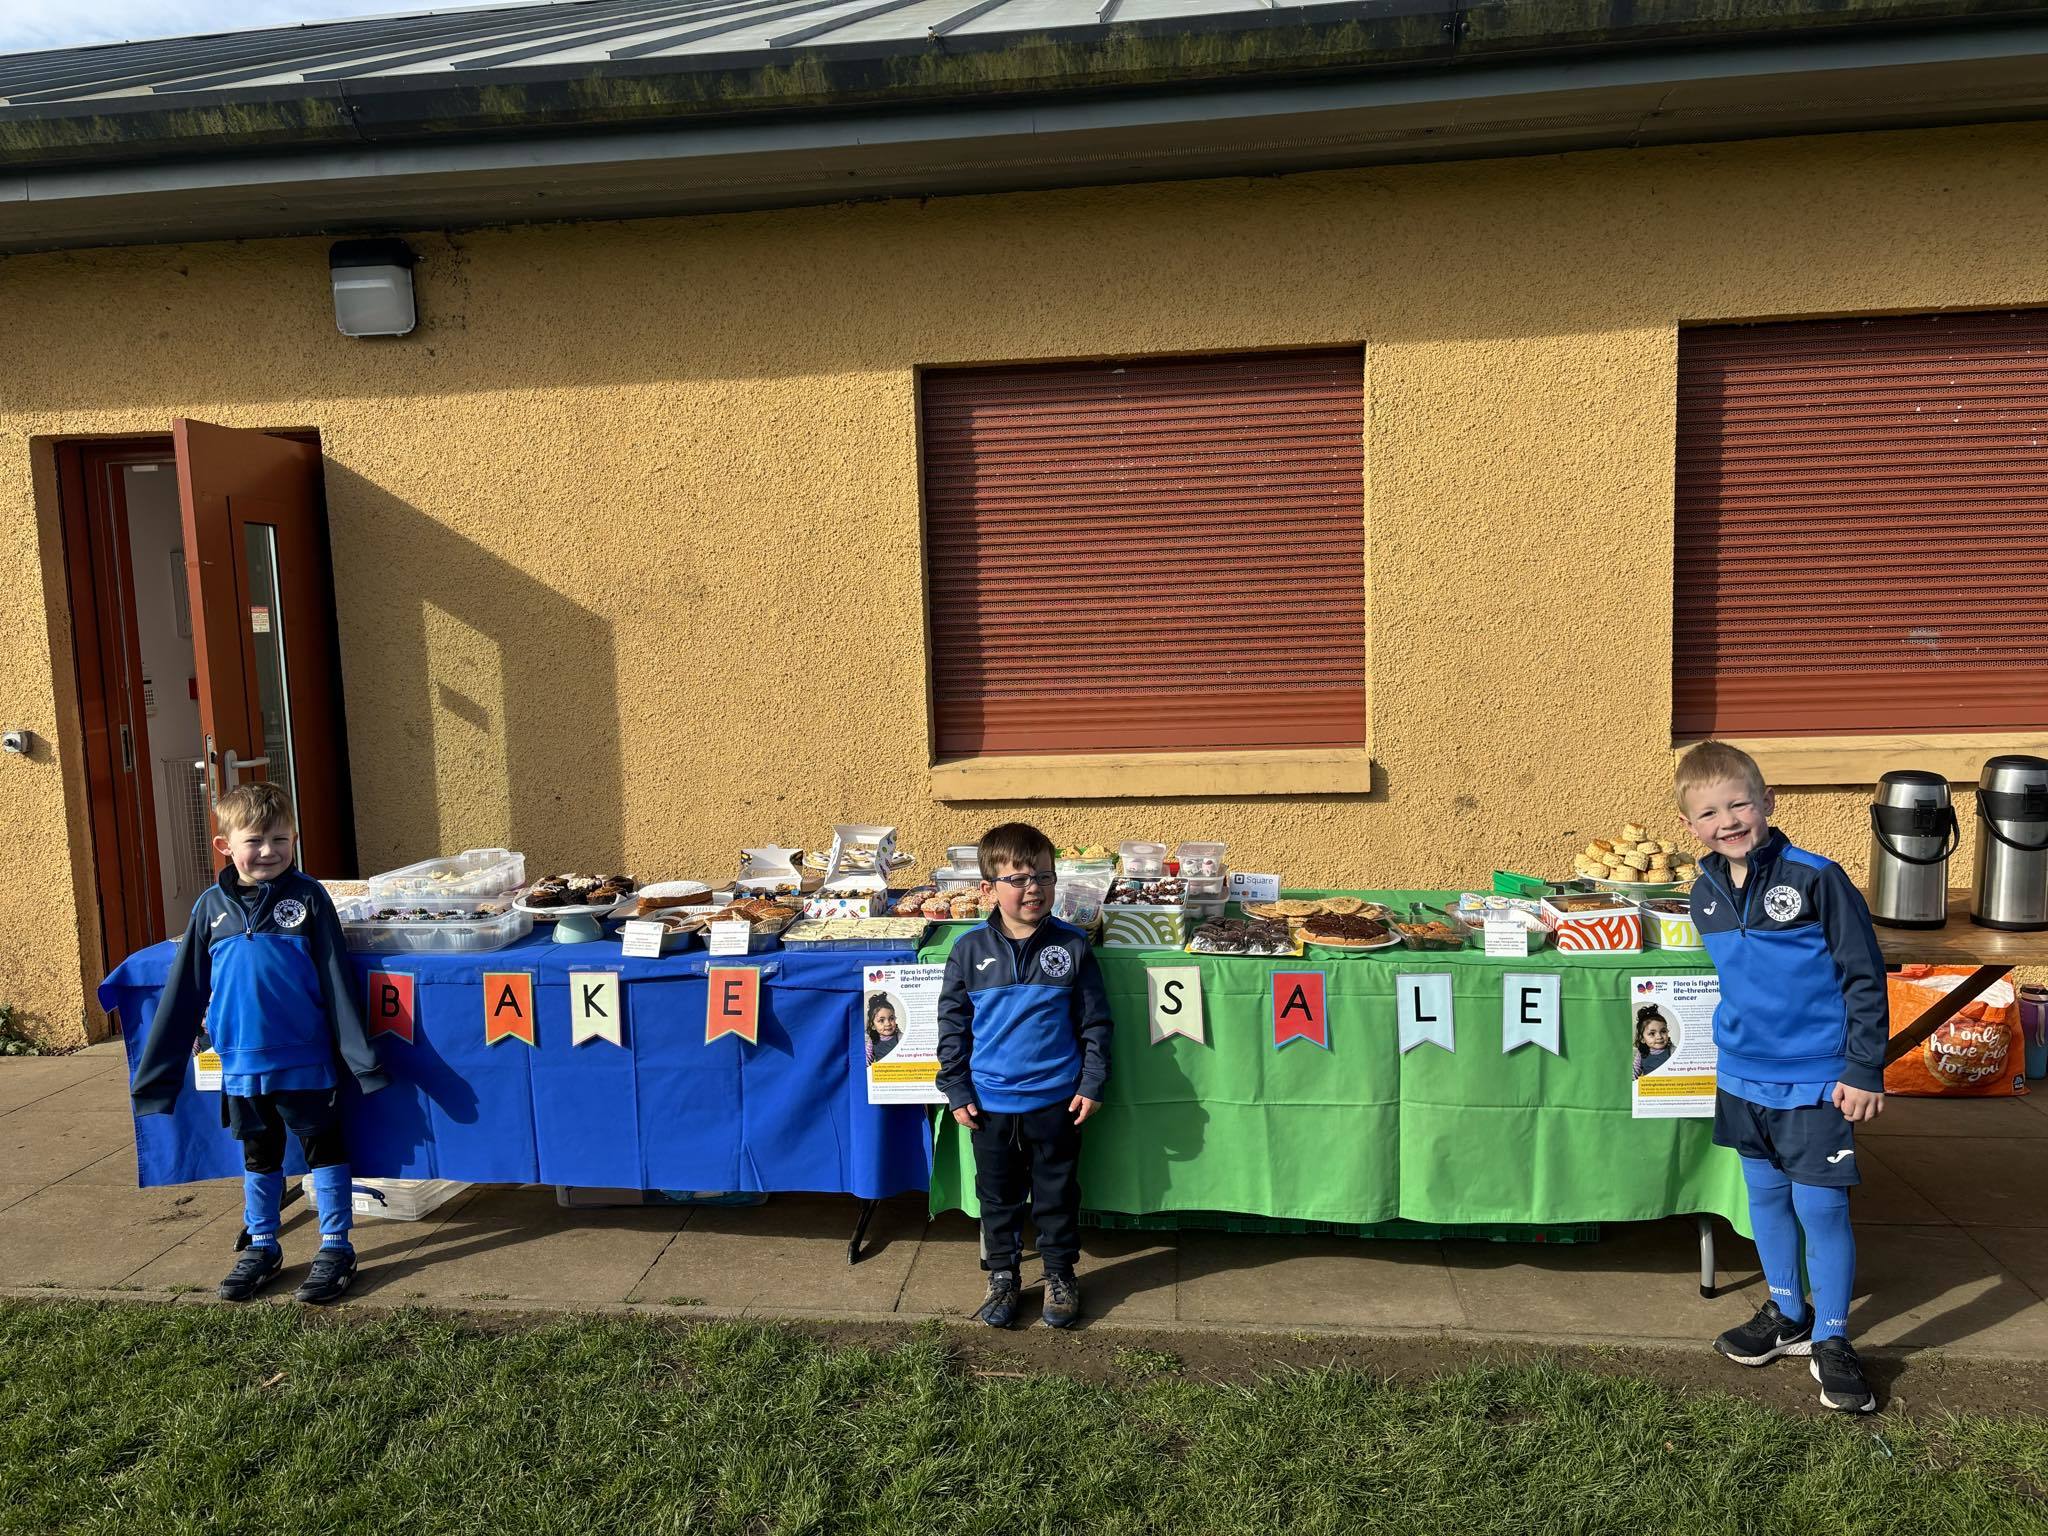 Generous youngsters have raised money through a bake sale in aid of Flora Gentleman